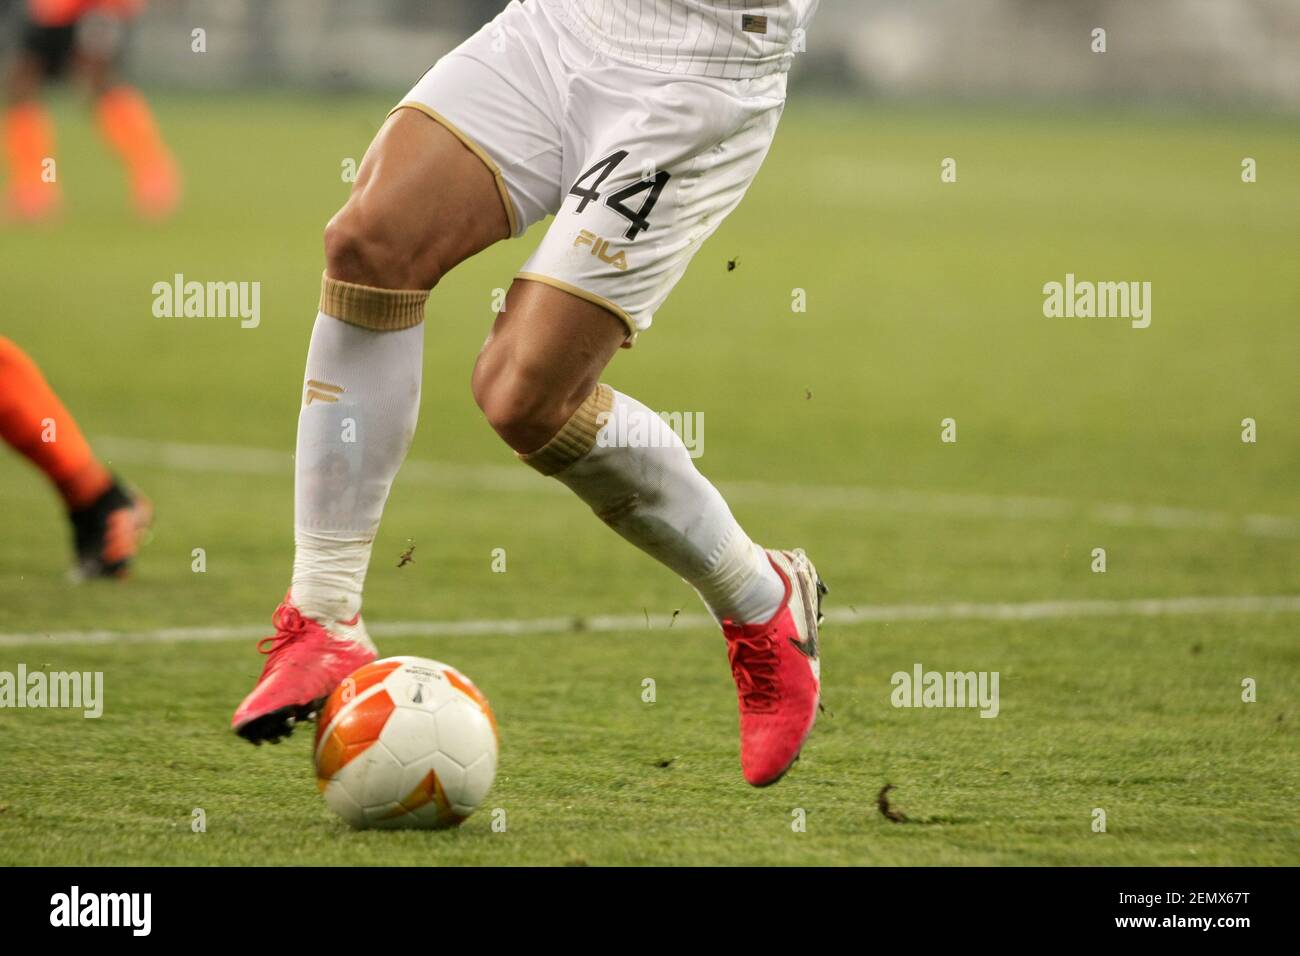 KYIV, UKRAINE - FEBRUARY 25, 2021 - Player of FC Maccabi Tel Aviv Luis Hernandez Rodriguez is seen in action during the UEFA Europa League Round of 32 2nd leg match against FC Shakhtar Donetsk at the NCS Olimpiyskyi, Kyiv, capital of Ukraine Stock Photo